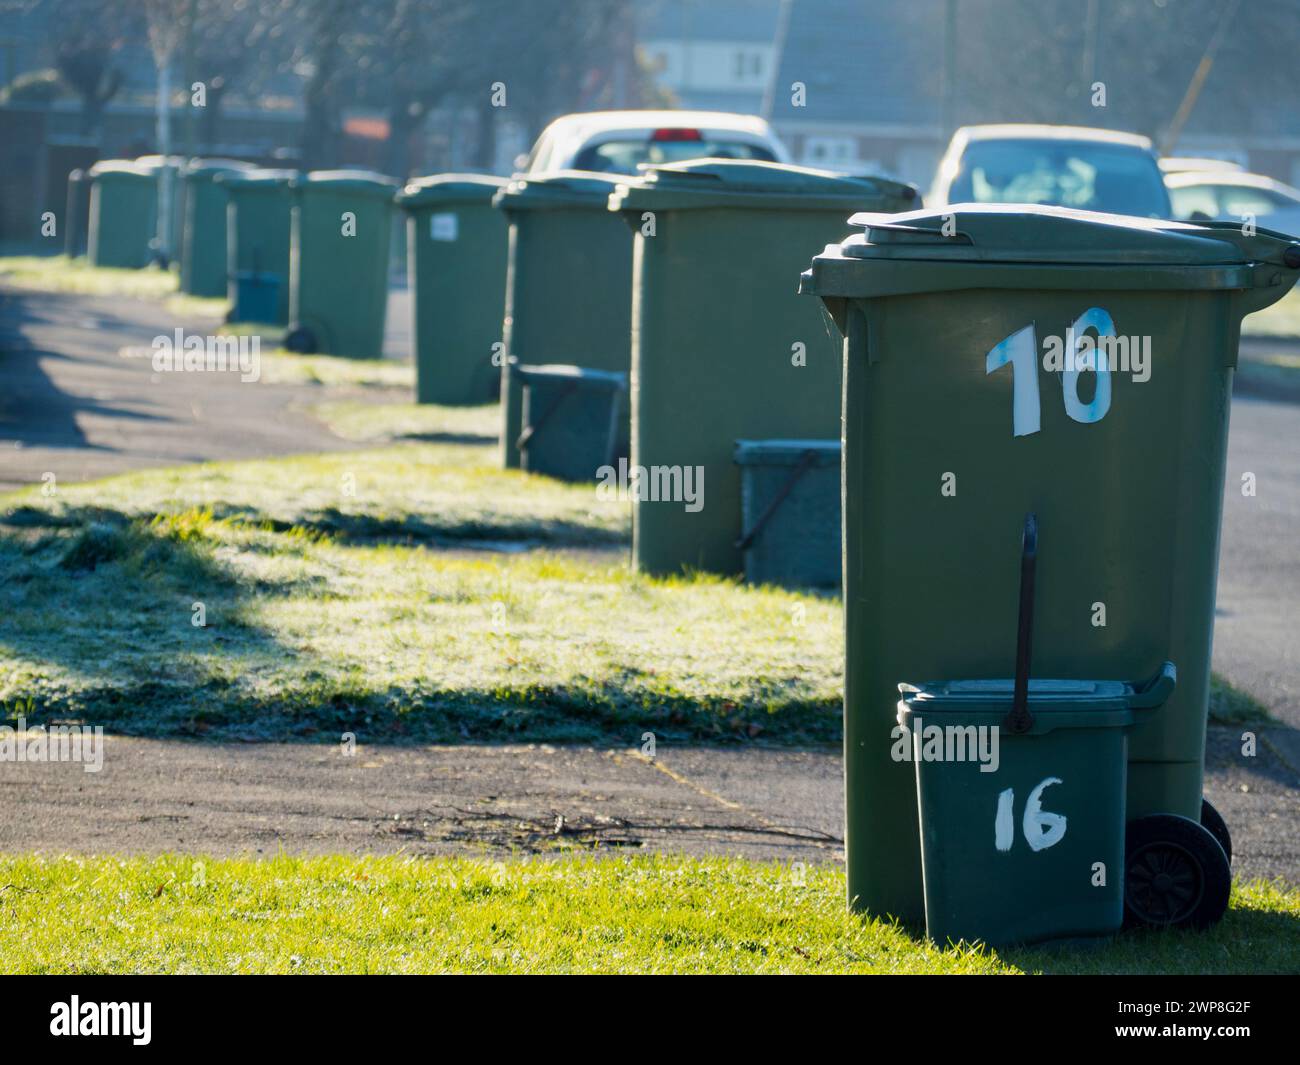 My home village of Radley in Oxfordshire has a sacred ritual, which must be performed without fail. The ritual of the garbage bins centres on Thursday Stock Photo